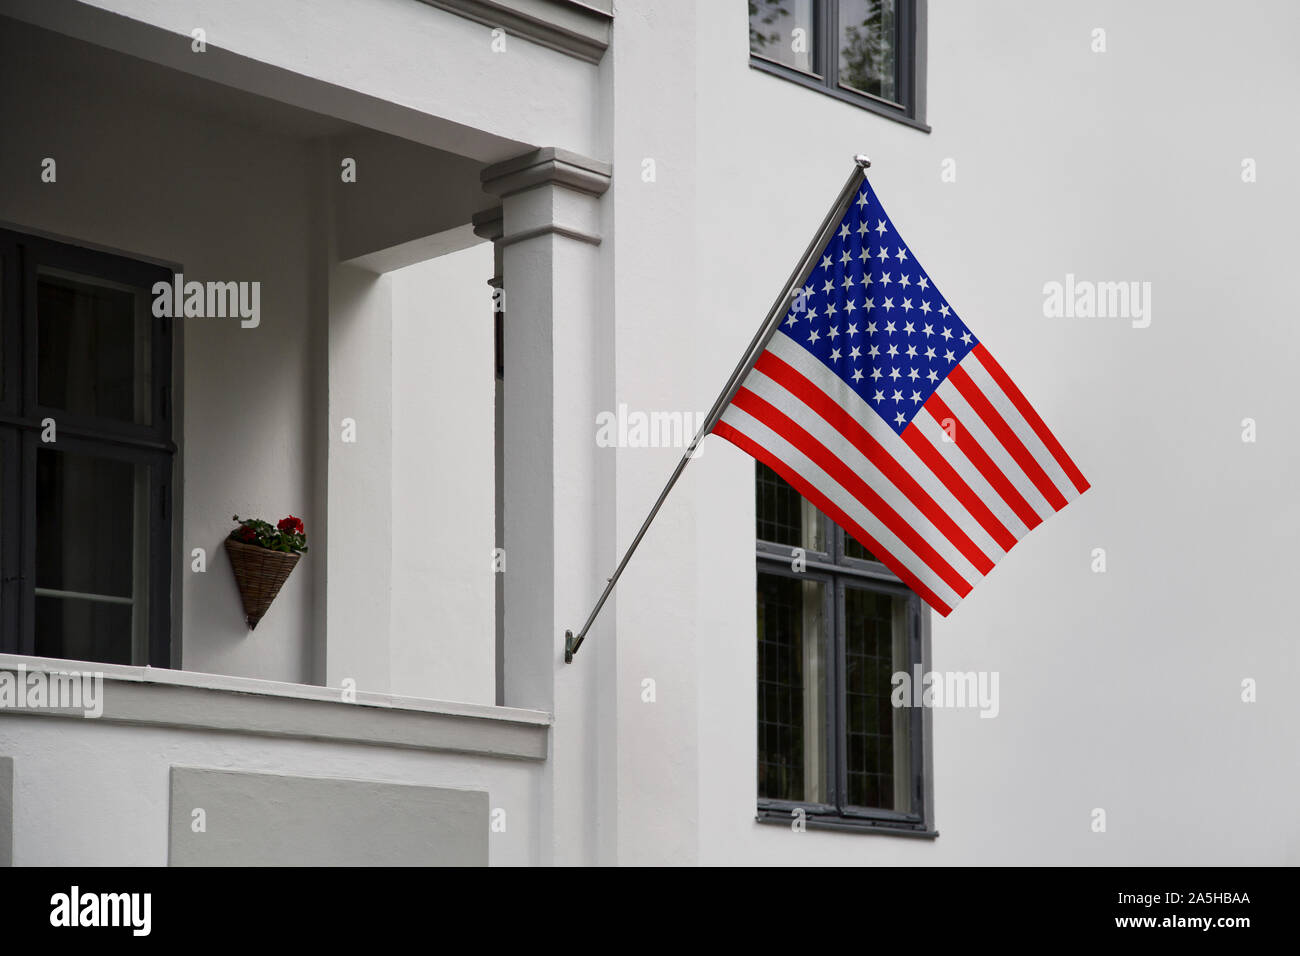 USA flag. American flag displaying on a pole in front of the house. National flag of United States of America waving on a home hanging from a pole on Stock Photo